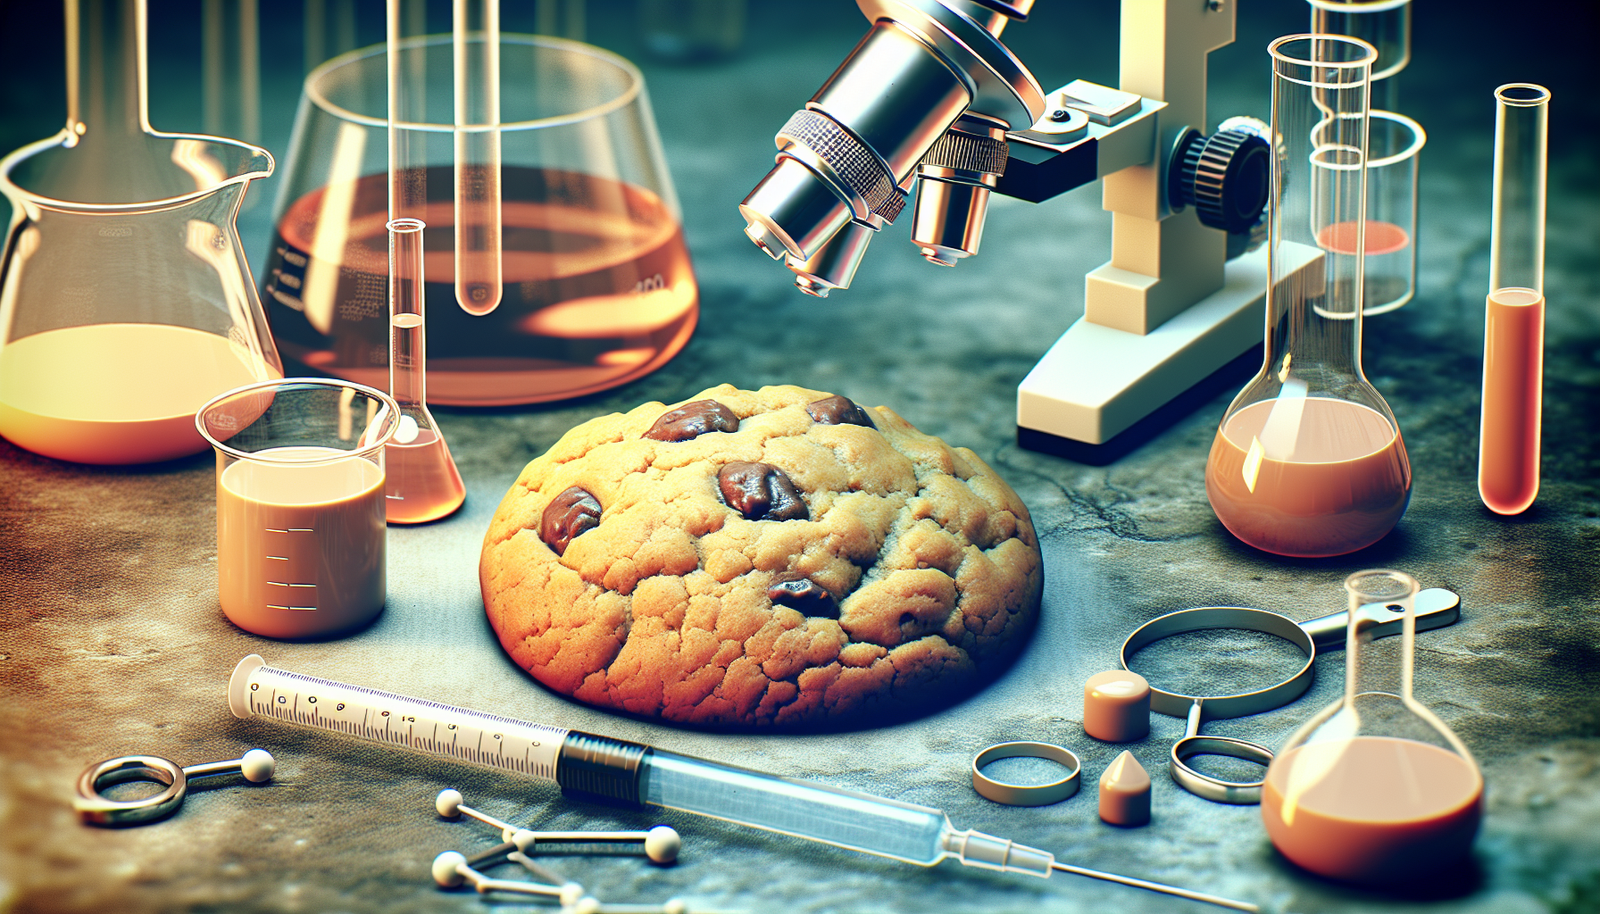 Insomnia Cookie: A Journey through the Lab